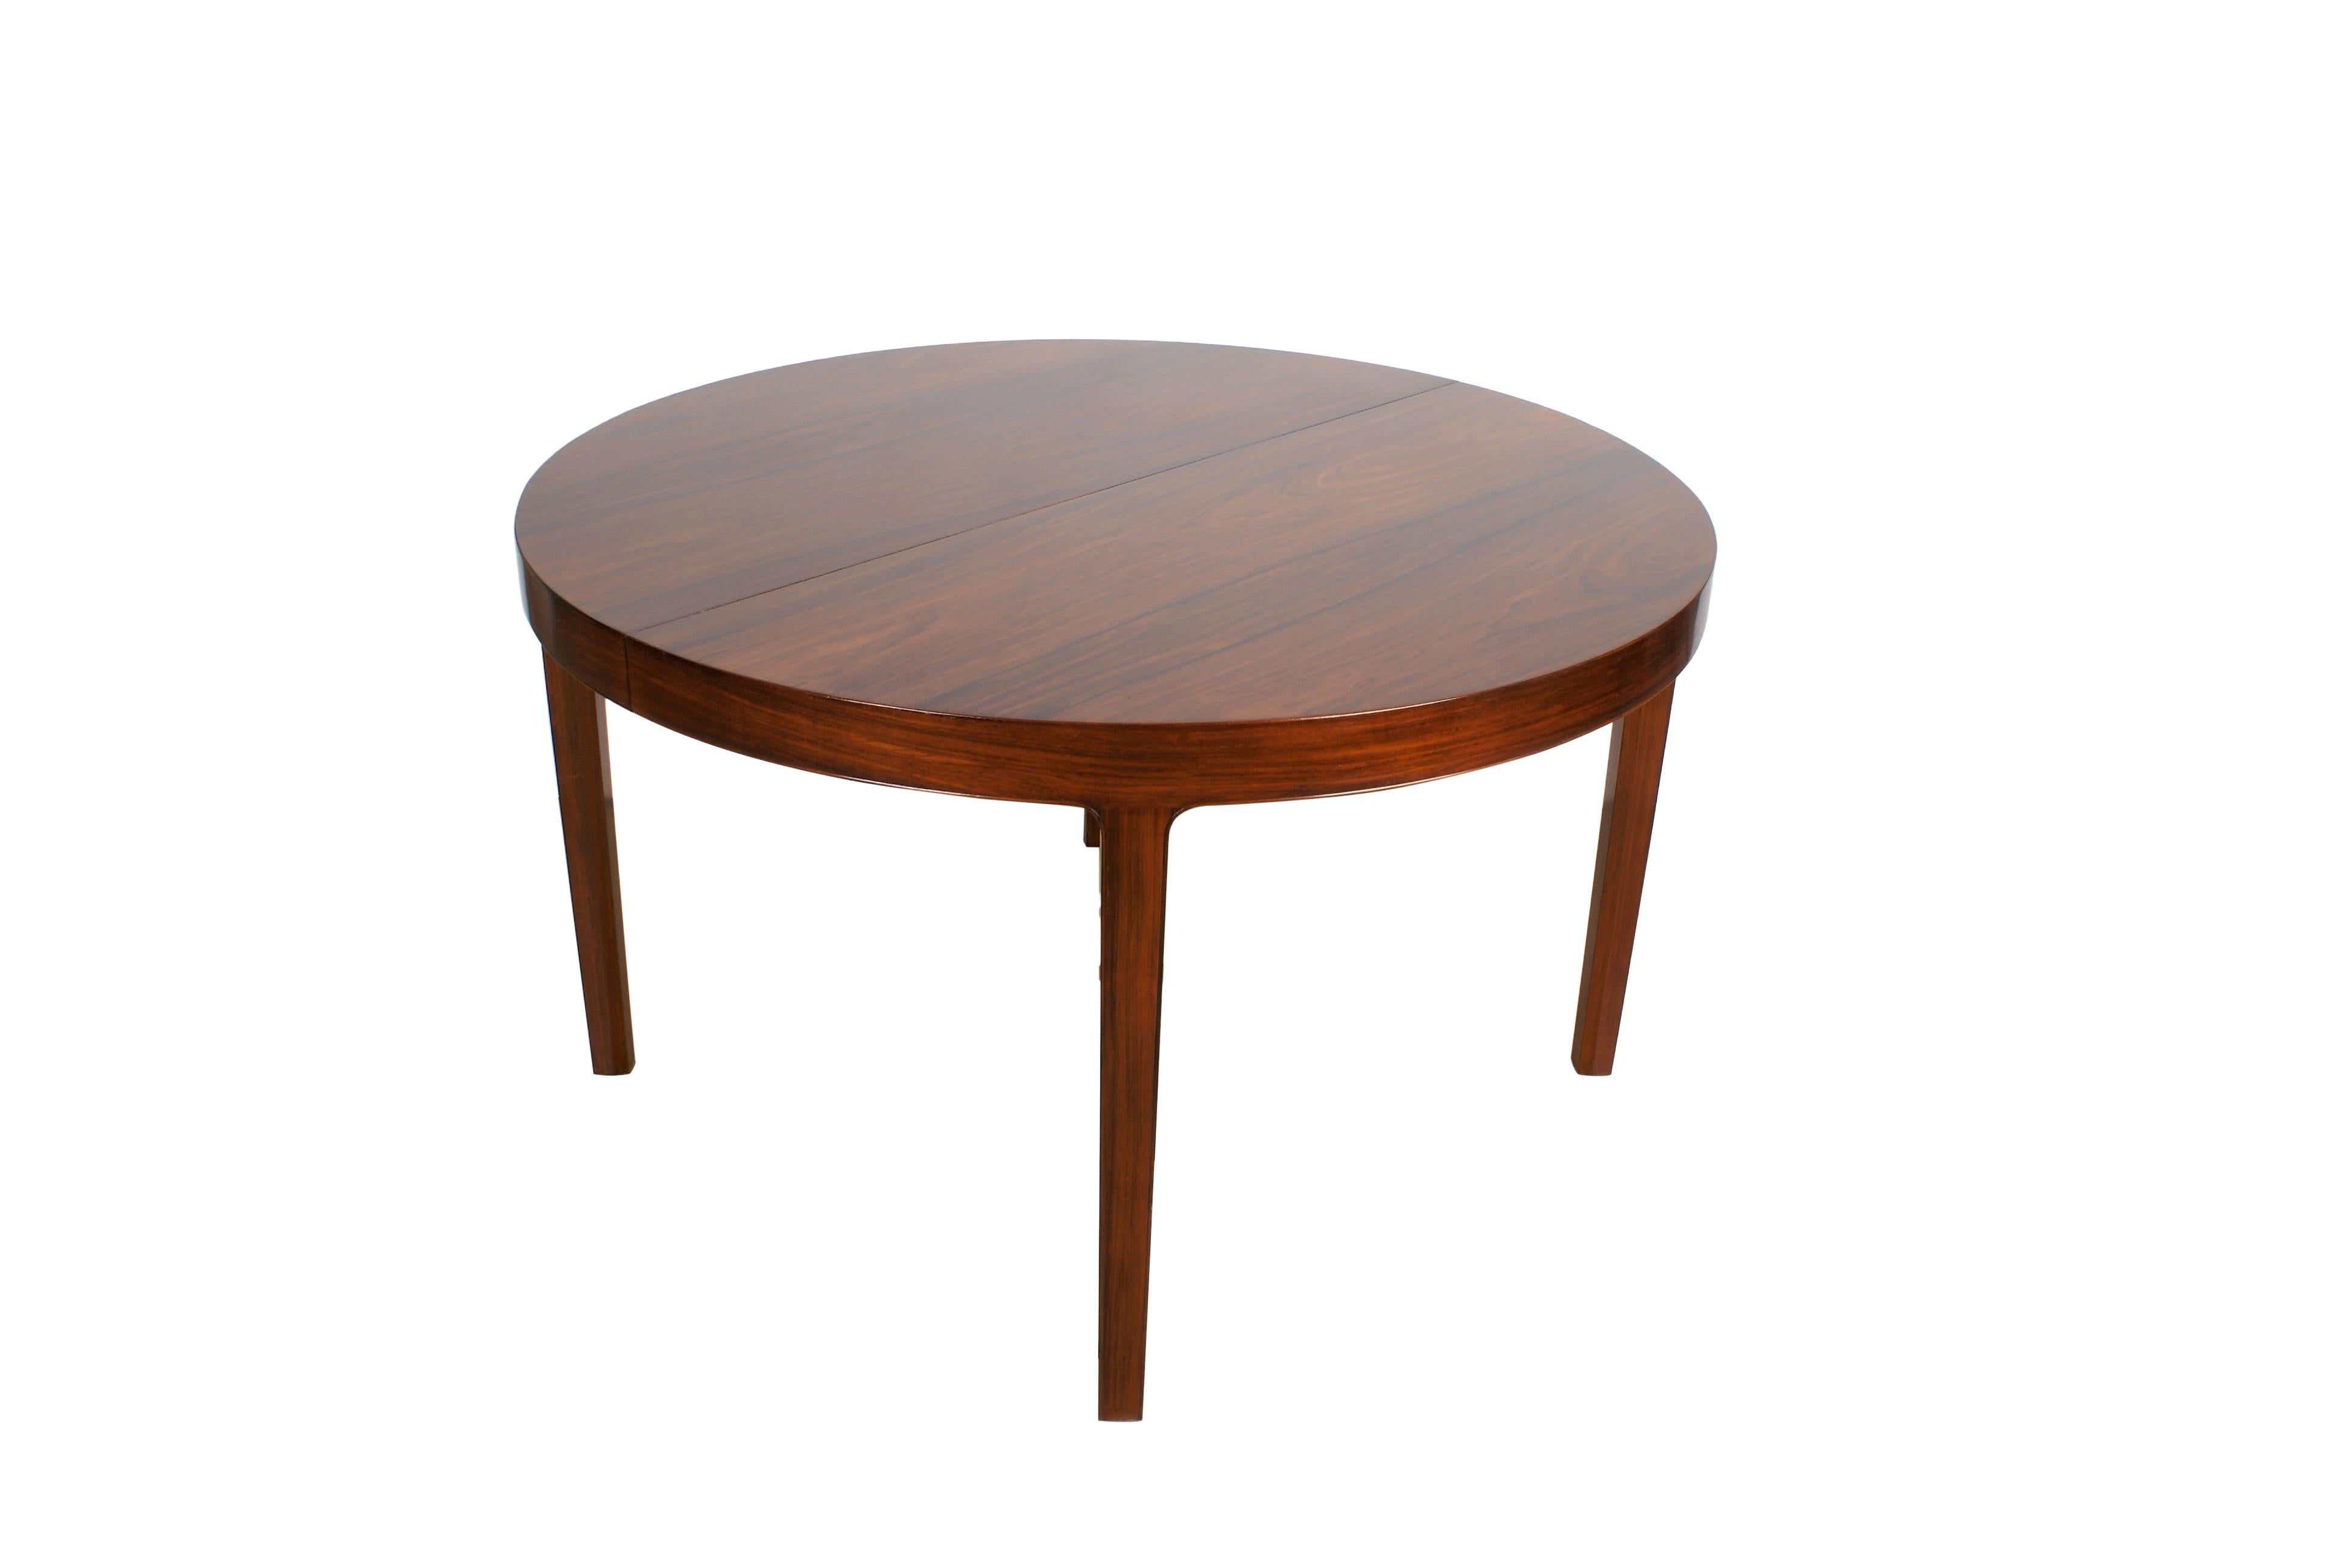 Ole Wanscher, dining table in Brazilian rosewood for master cabinetmaker A.J. Iversen. With metal tag from Illums Bolighus. Comes with three extension leaves - shortest version of the table is a circular version with a diameter of 125 cm (43 in.),